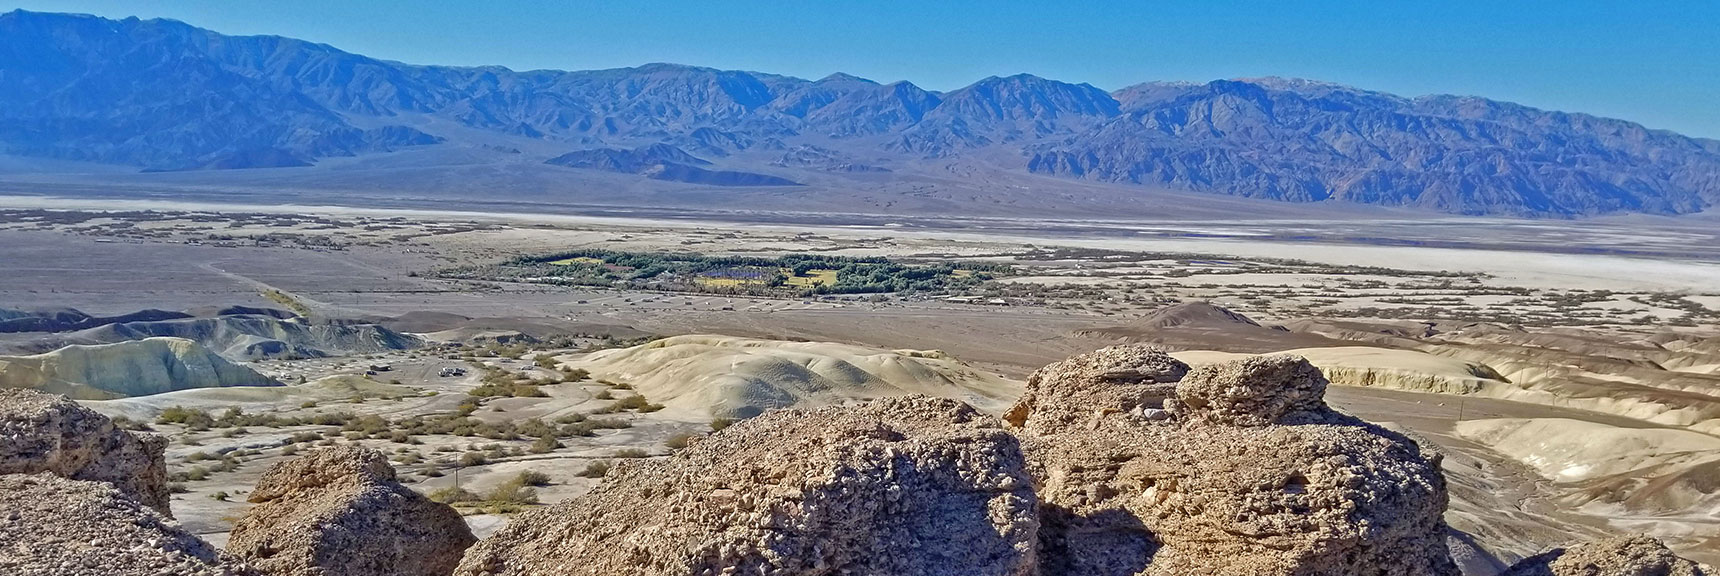 Furnace Creek Ranch and Panamint Mountains from Table Rock Summit. | Tea House & Table Rock Circuit | Furnace Creek | Death Valley National Park, California